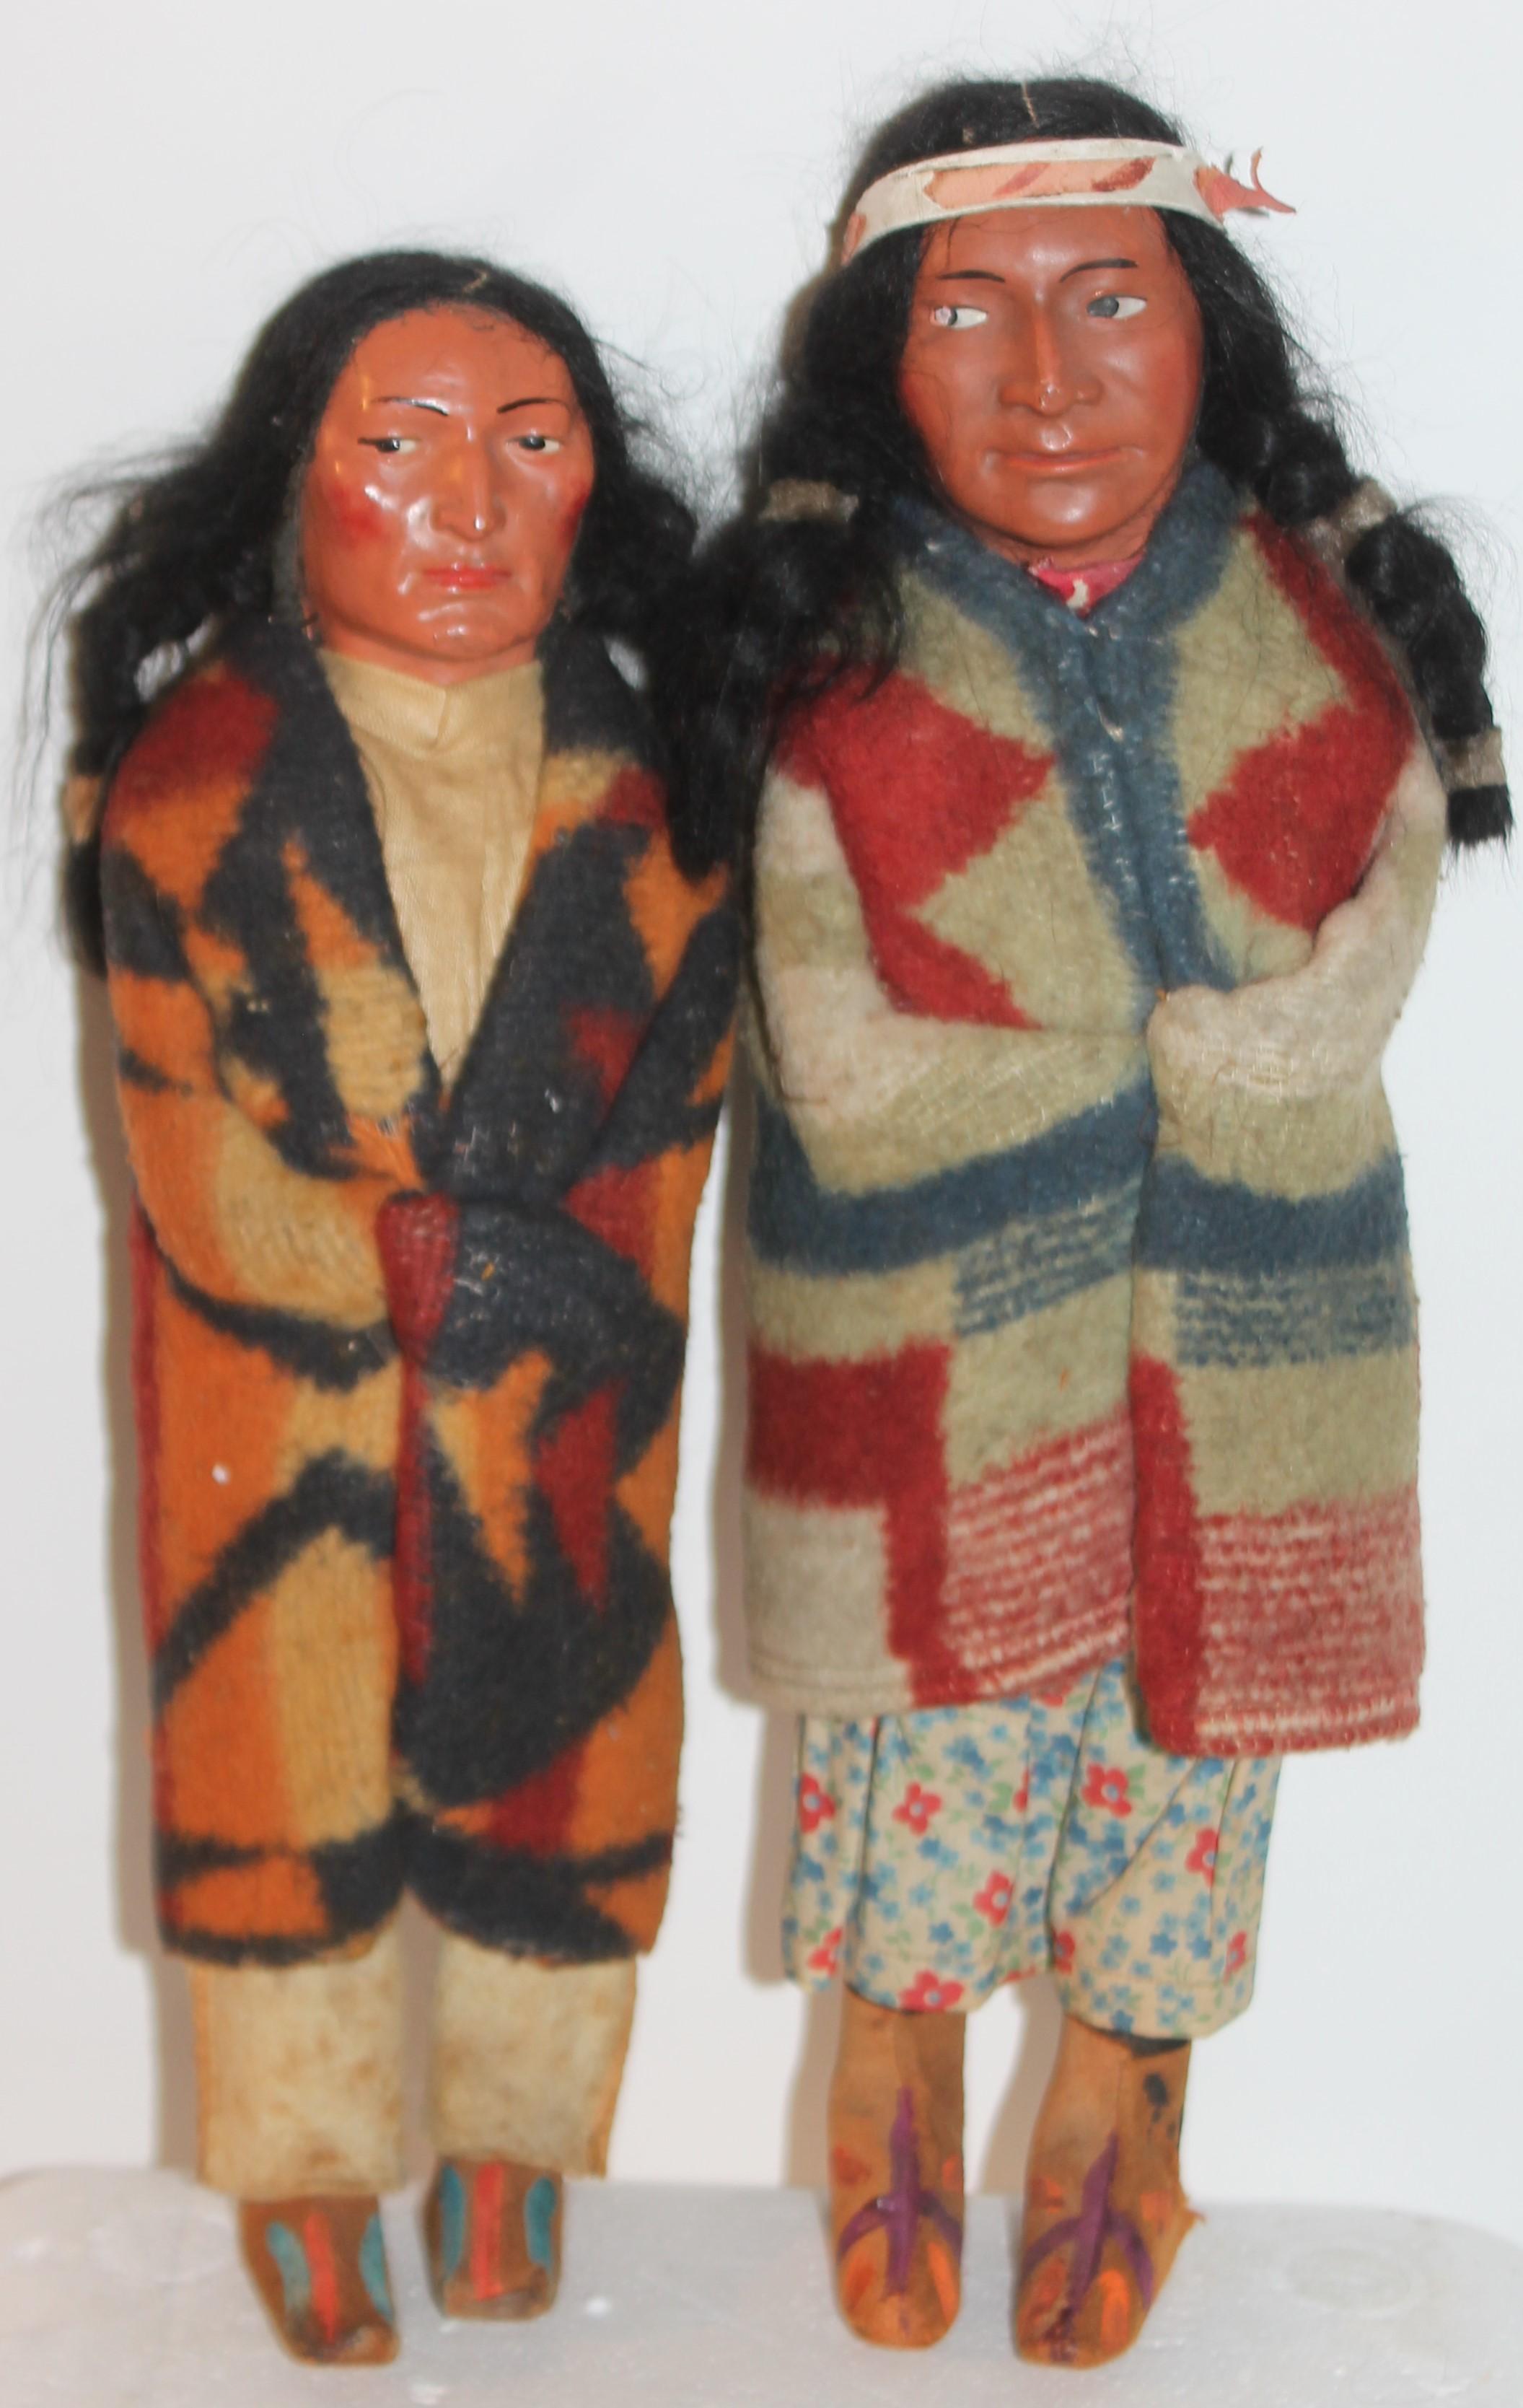 Collection of Four 1930's Skookum Native American dolls. The Dolls have real hair and are wearing Indian design Beacon blankets. Skookum dolls are highly collectible.
largest measures - 13 tall x 3.75 wide 
smallest measures - 11 tall x 3.5 wide.